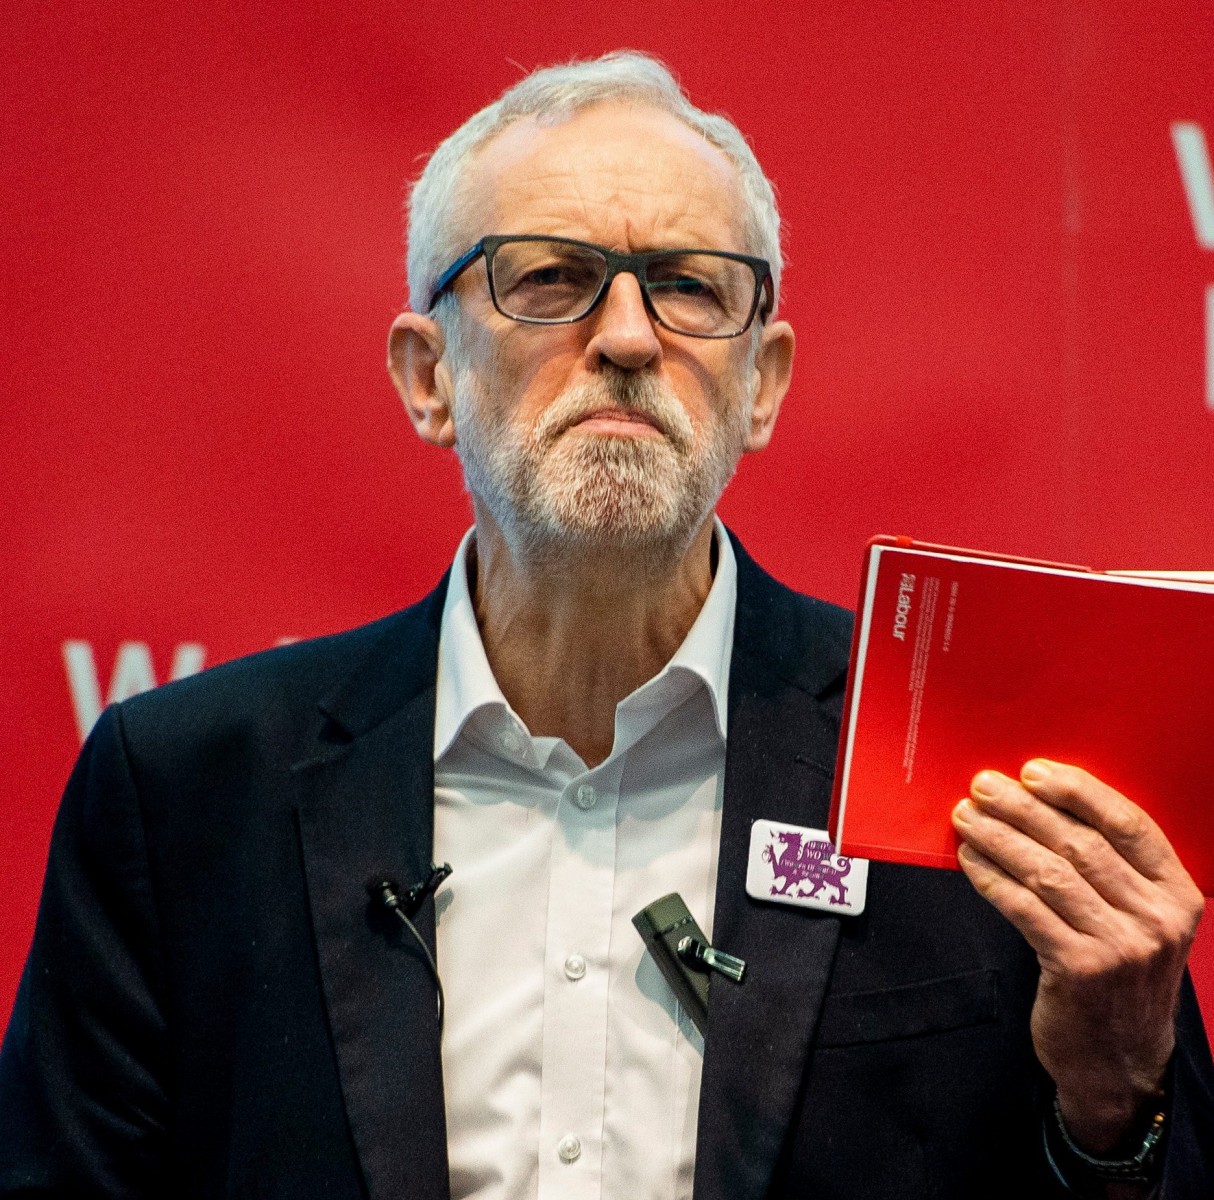 Jeremy Corbyn was left languishing in fifth place for his dating potential